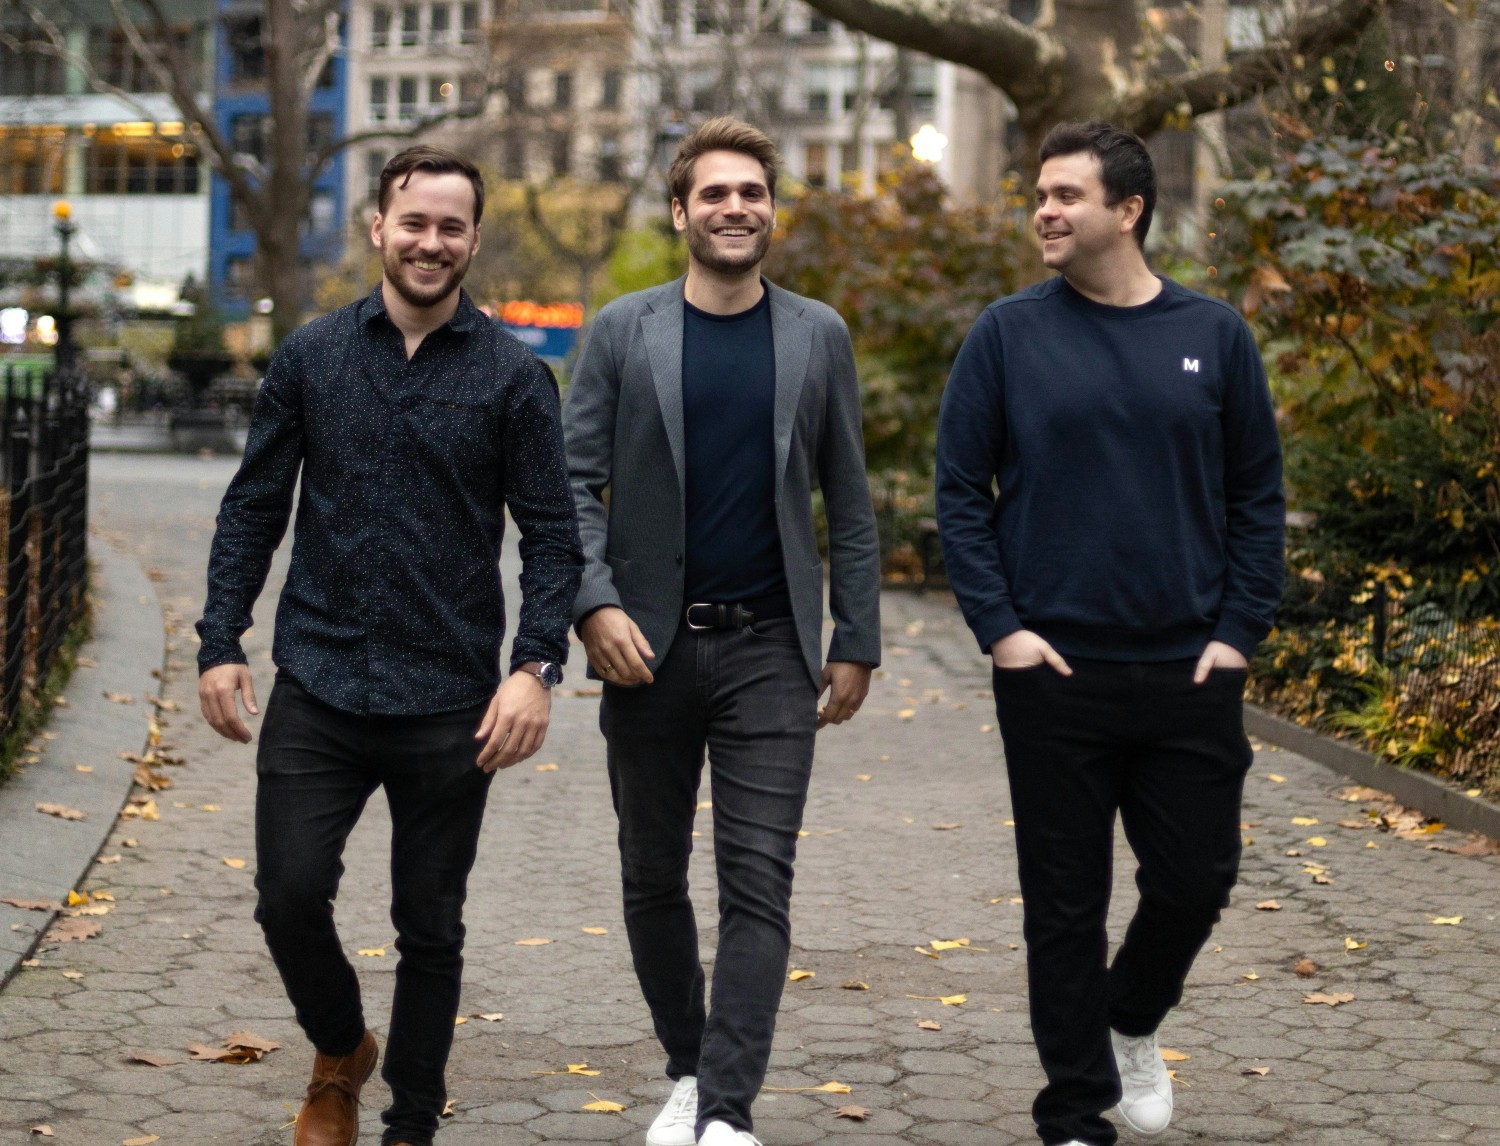 Nathaniel Harley, co-founder and CEO, Ben Conant, co-founder and CTO, and Mike Bosserman, CRO, out in NYC.  